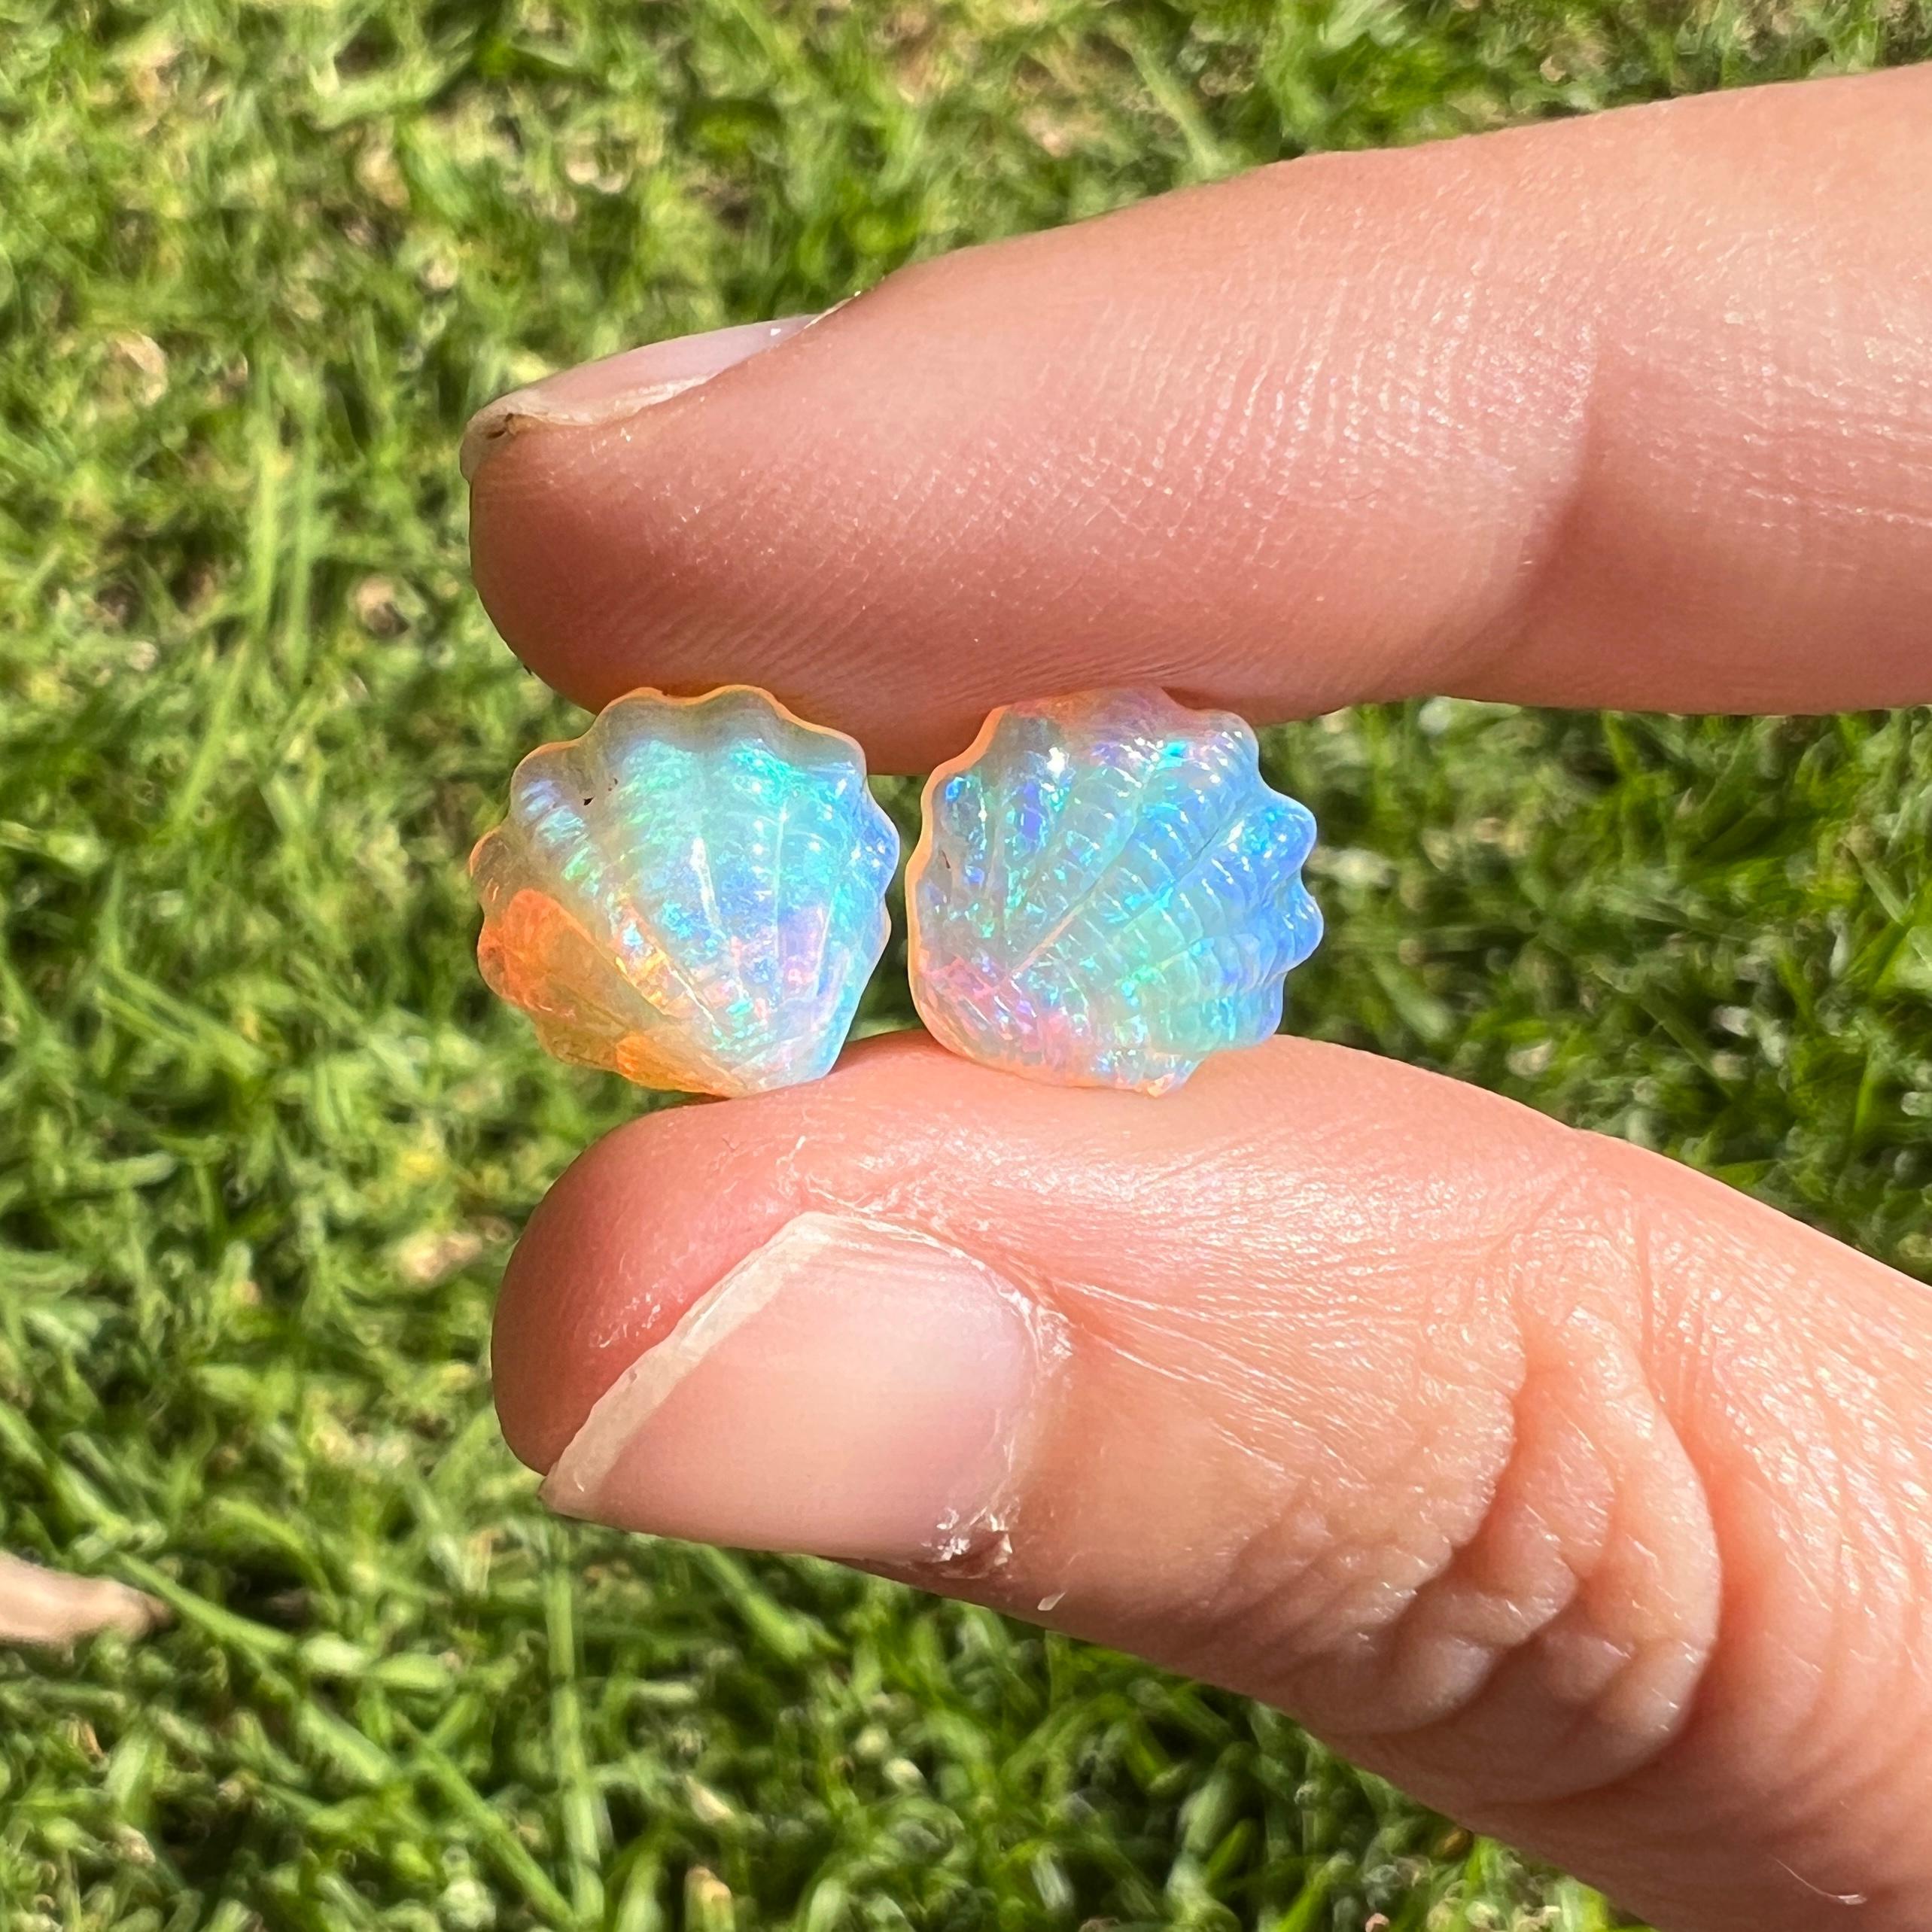 This beautiful 4.88 Ct Australian gem crystal opal pair, carved into shells, is a truly exceptional addition to any collection, mined by Sue Cooper herself. Its rarity, coupled with the amazing shell carving, captivates connoisseurs with its vibrant